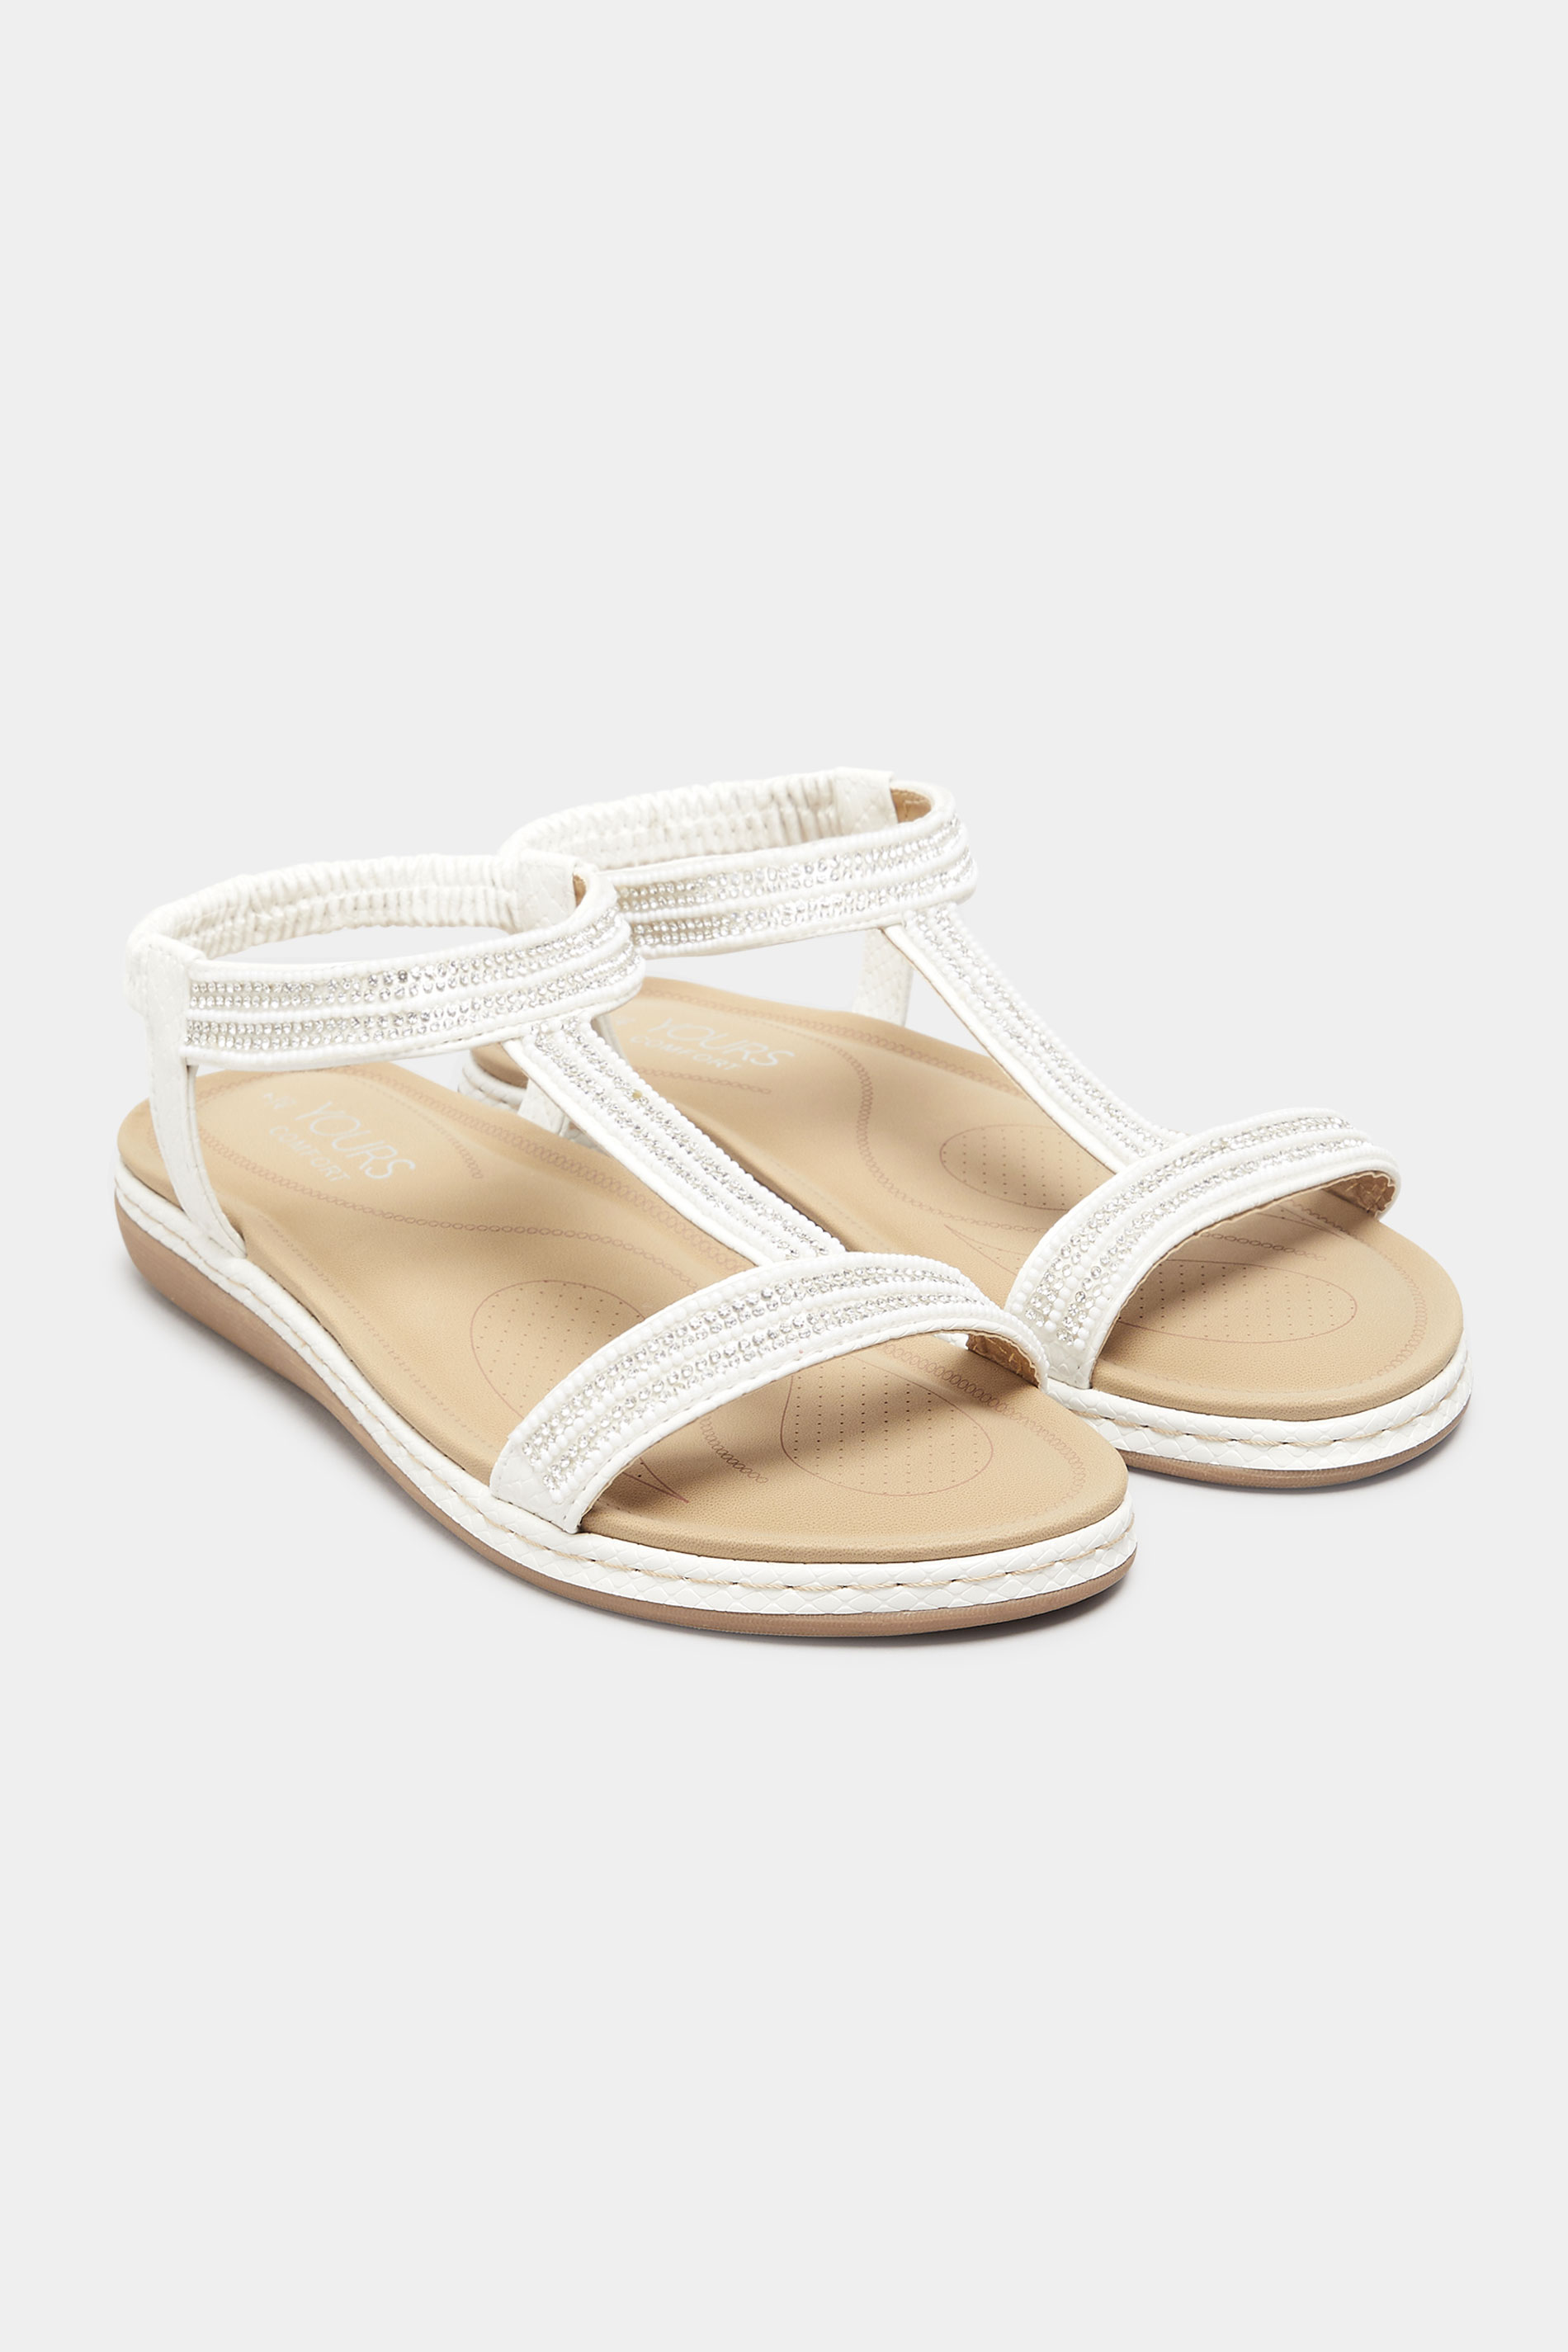 White Diamante Strap Sandals In Extra Wide EEE Fit_A.jpg